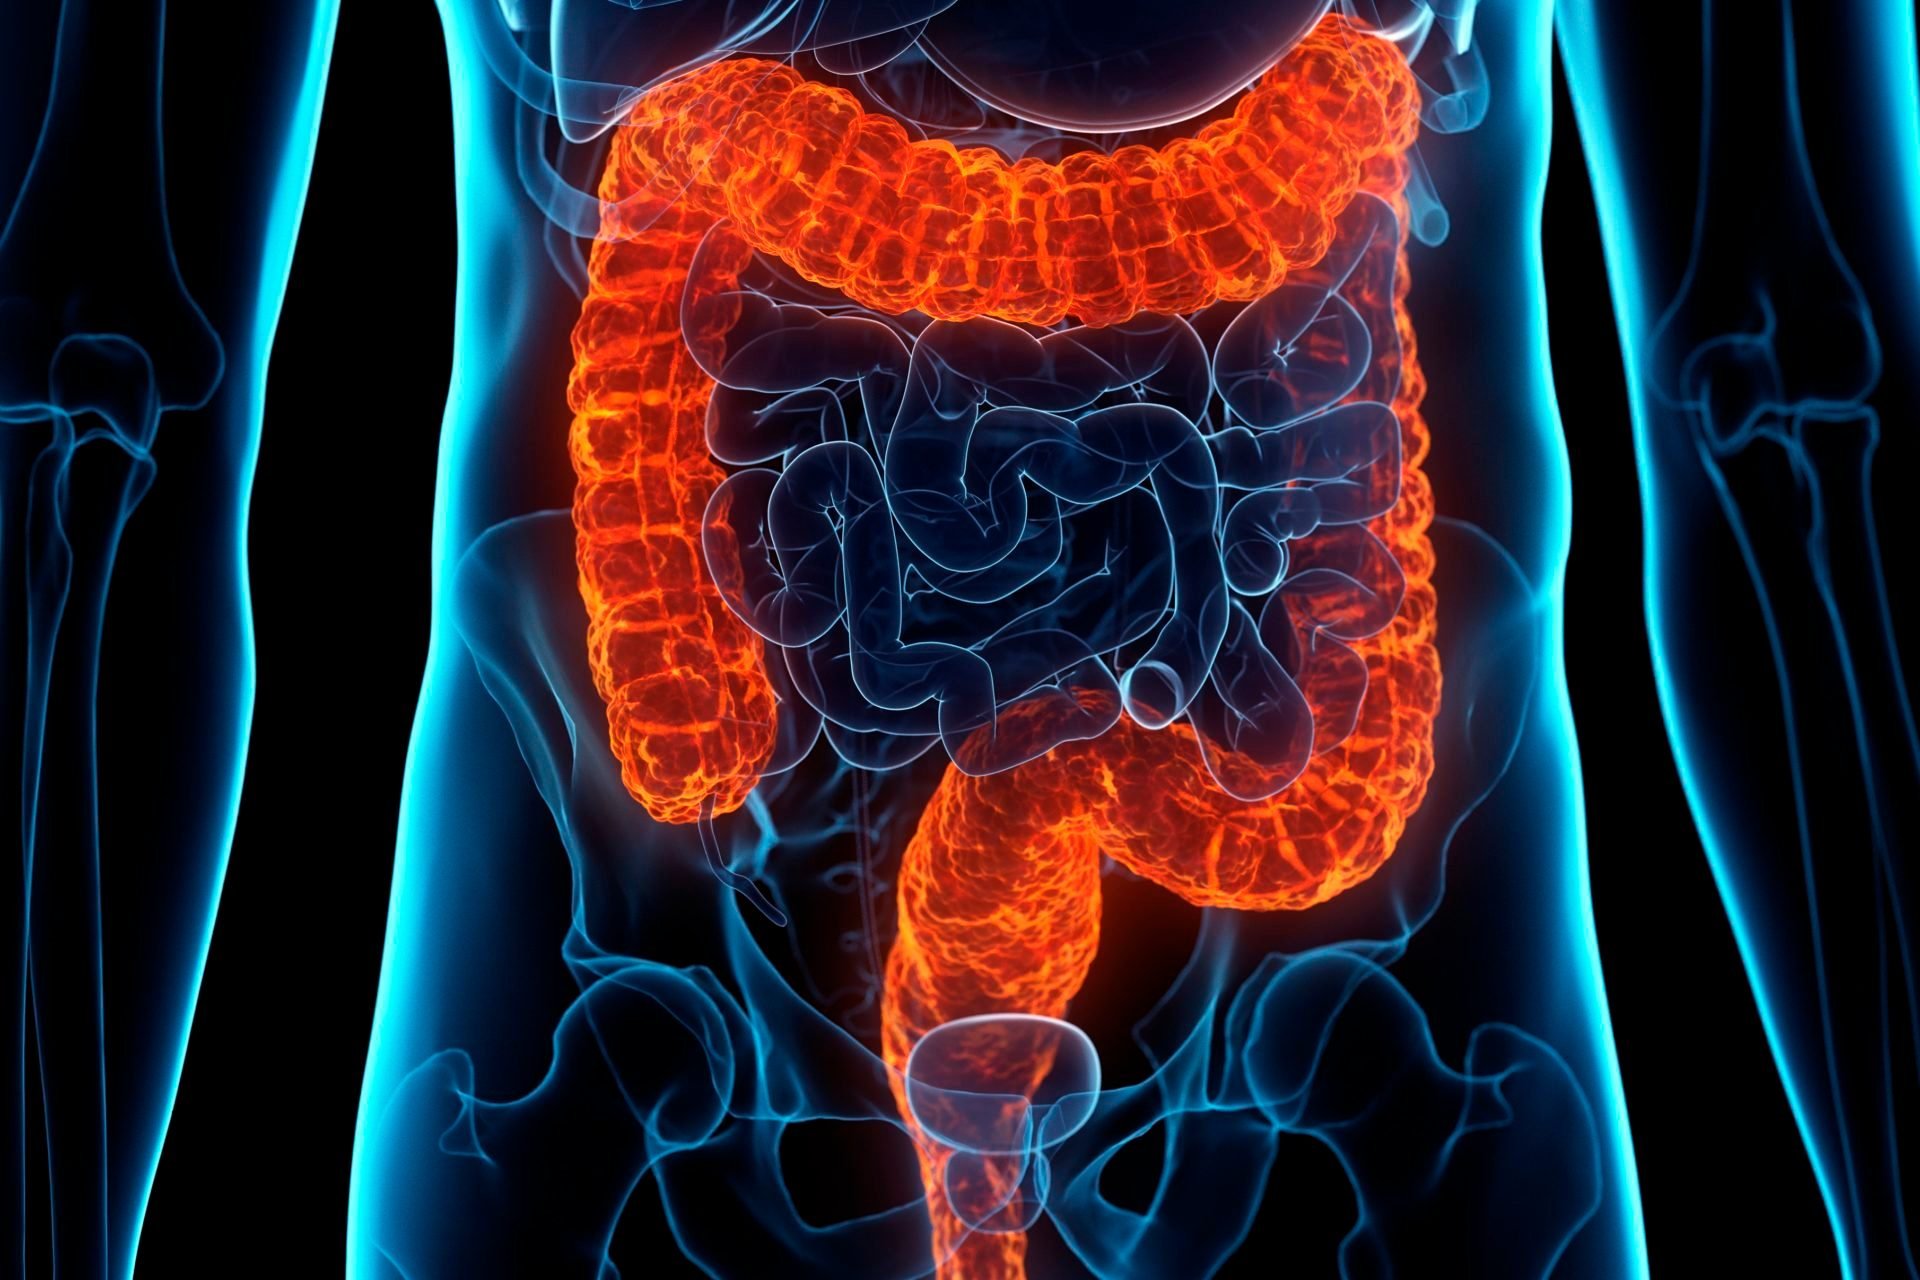 What You Need to Know About Ulcerative Colitis